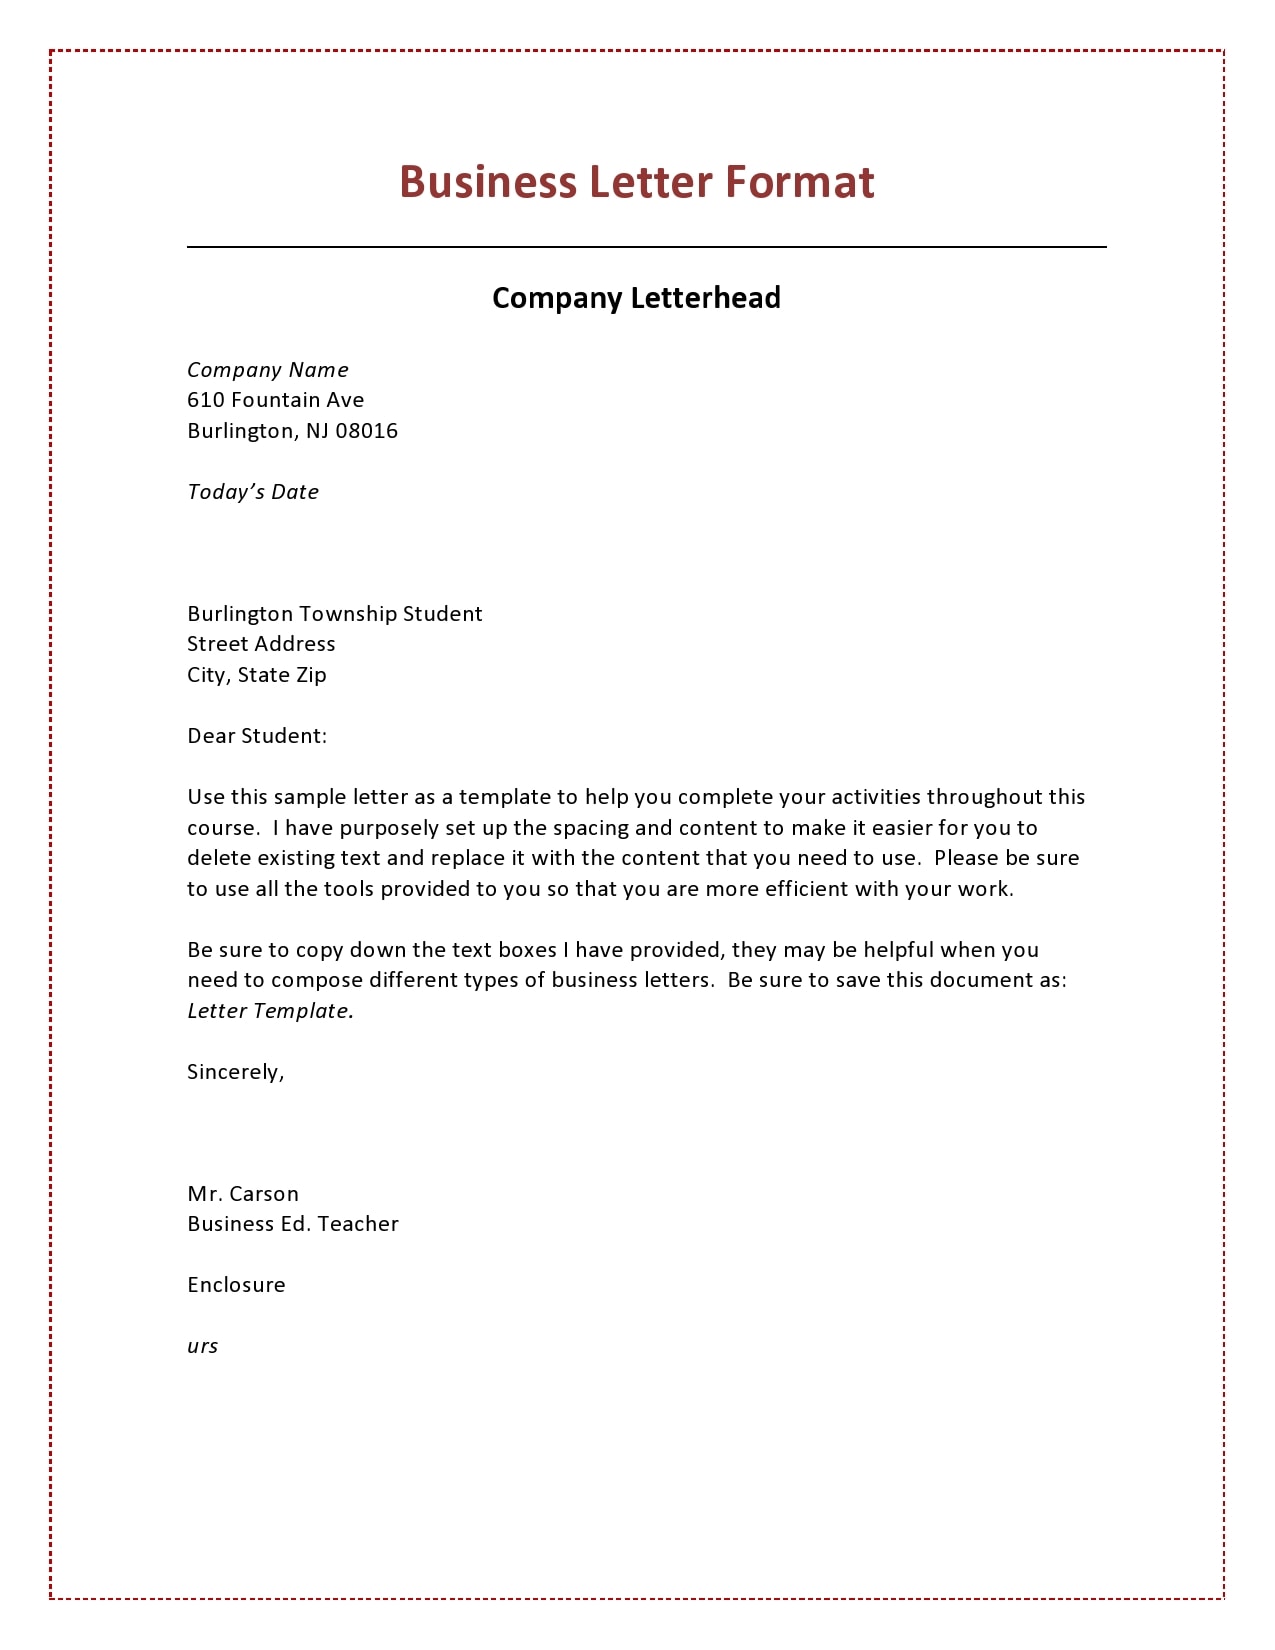 25 Professional Business Letter Templates [Word] With Regard To Microsoft Word Business Letter Template